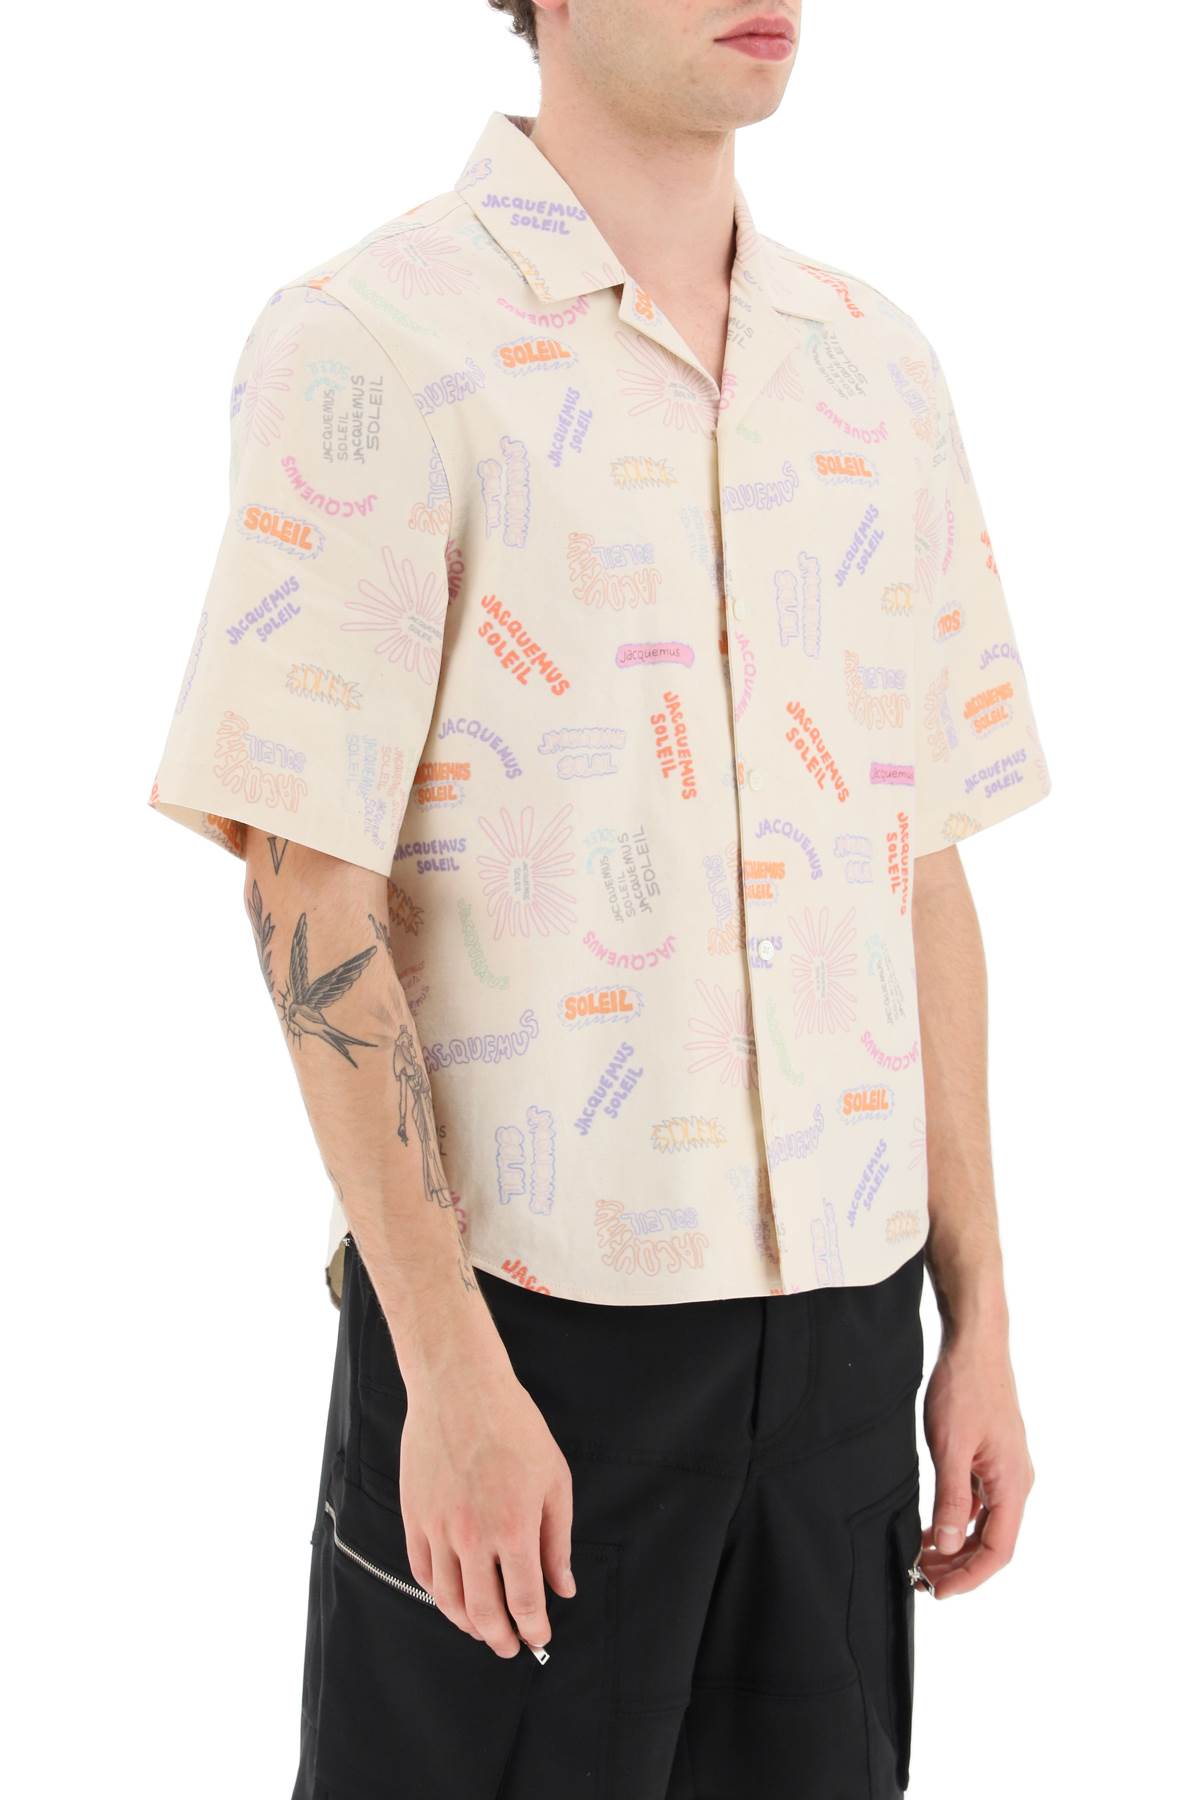 Shop Jacquemus Men's Short Sleeve Shirt With Bowling Collar And Contrasting Logo Prints In Multicolor